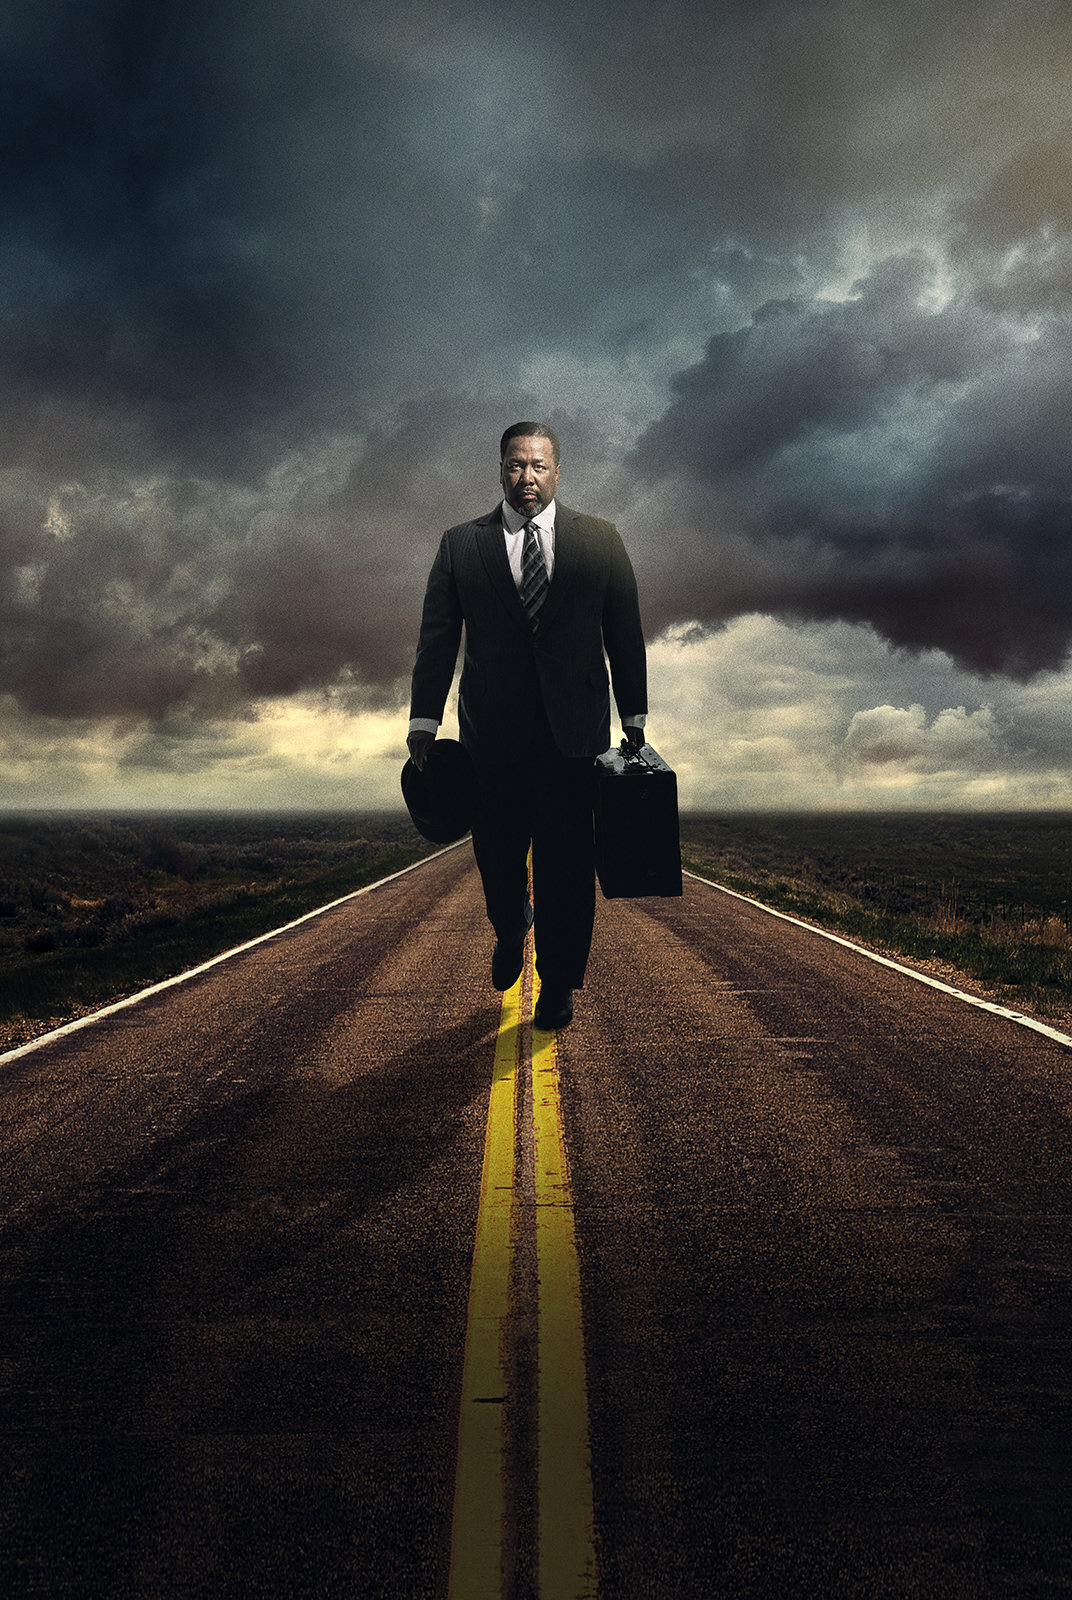    Wendell Pierce     Death of a Salesman , Poster Shot, Piccadilly Theatre, London  Artwork:  AKA  